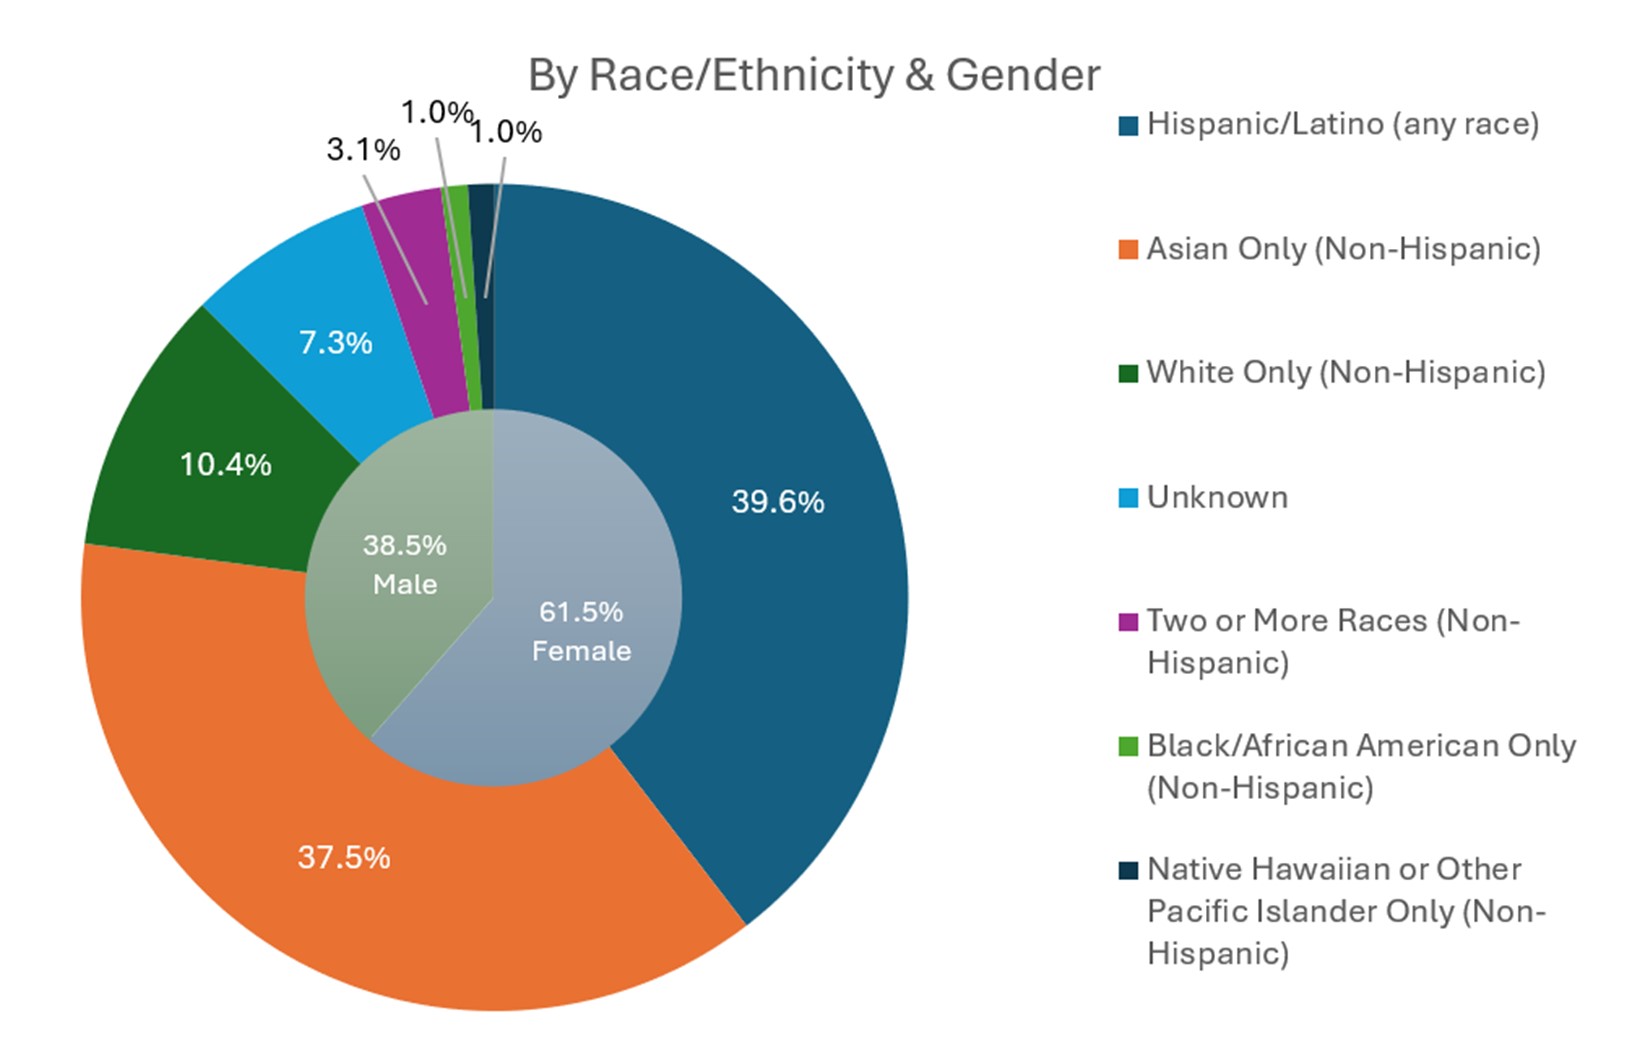 Pie Chart showing the percent represented by each race and ethnicity category as well as gender identity